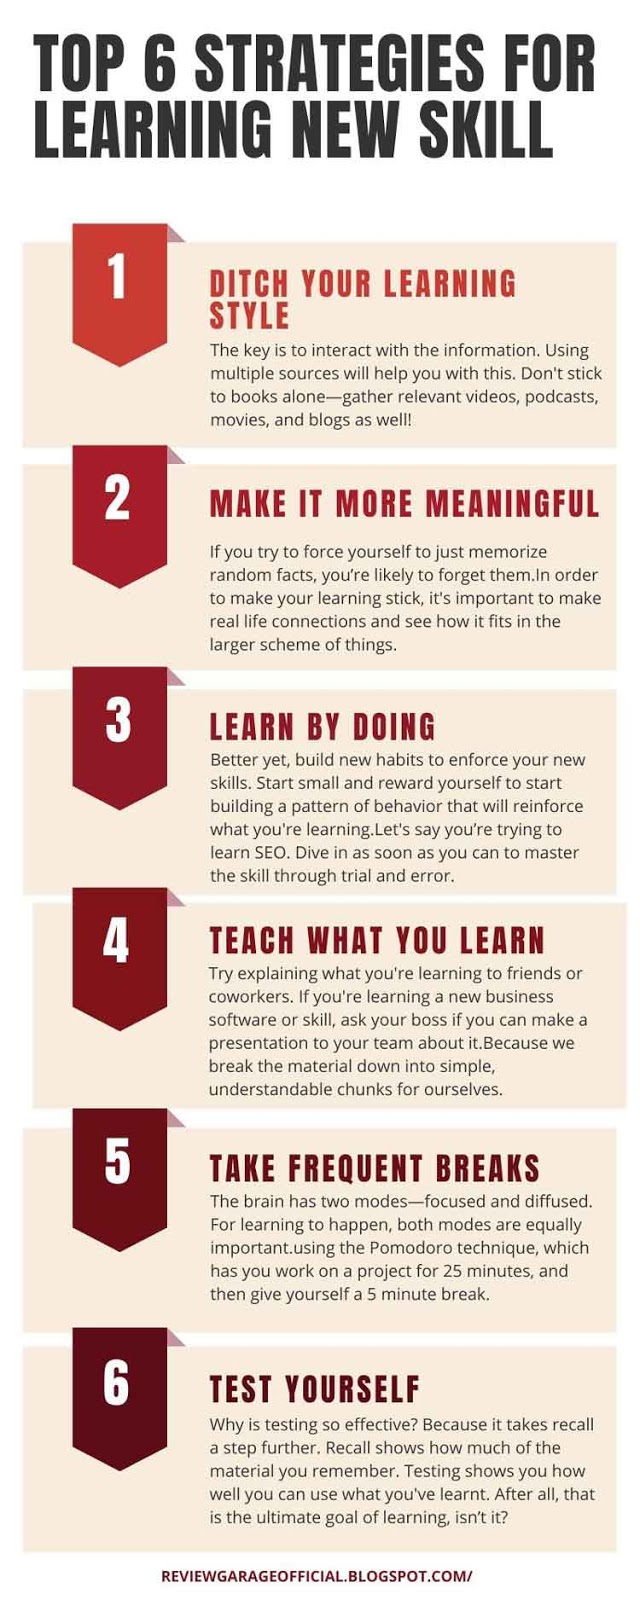 6 ways to learn new skill